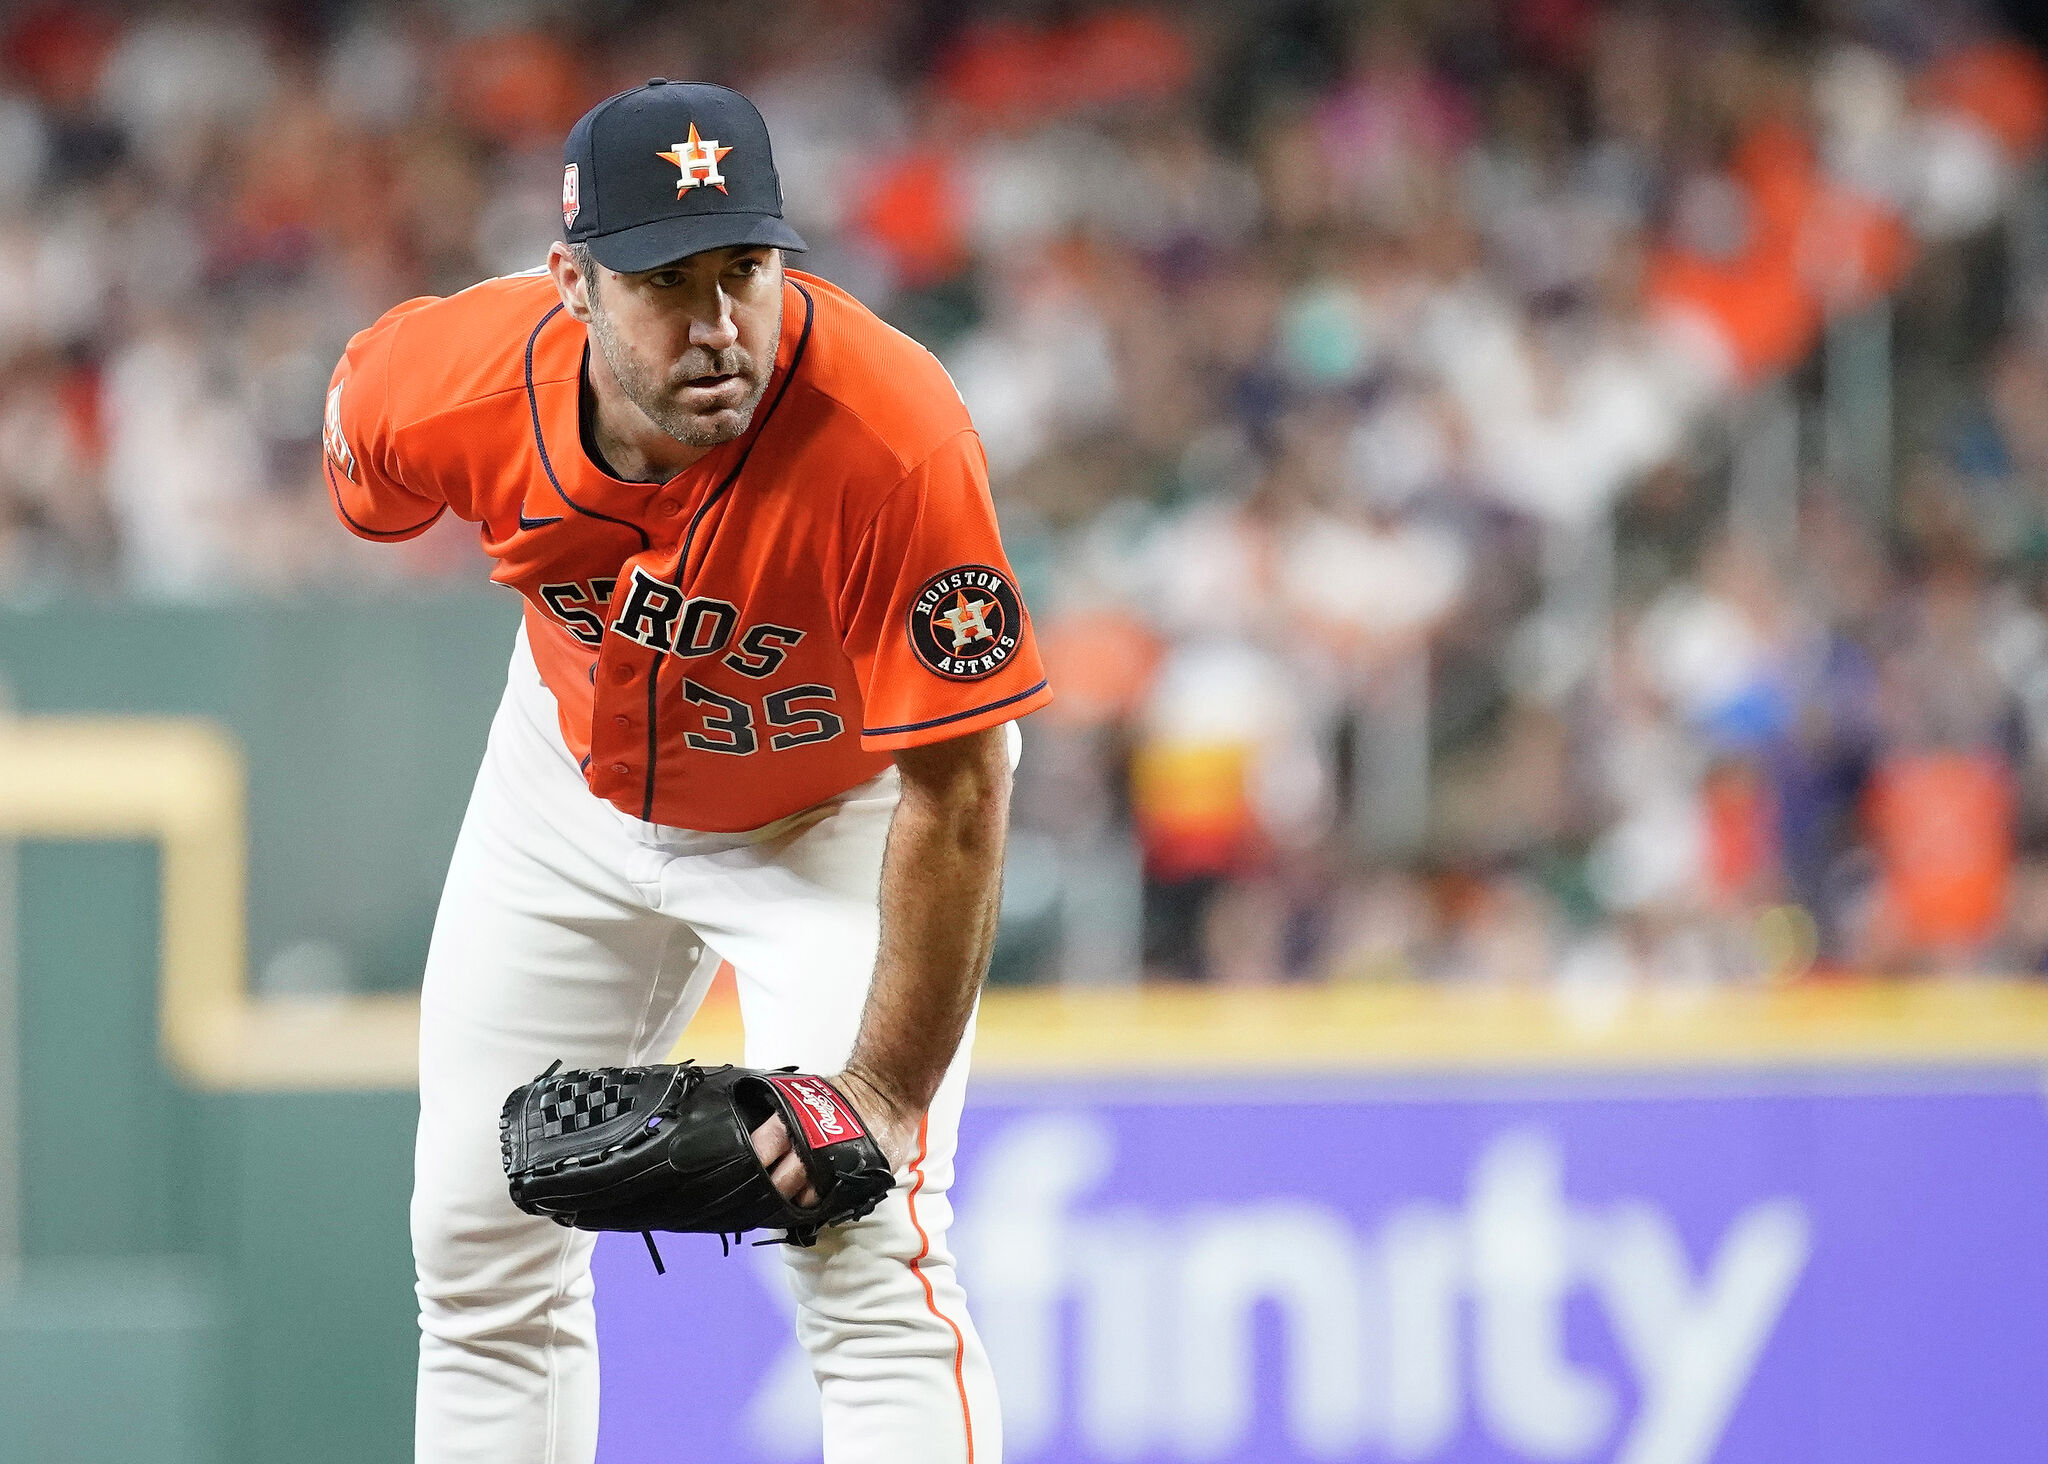 Is the 2022 season championship-or-bust for the Astros? - The